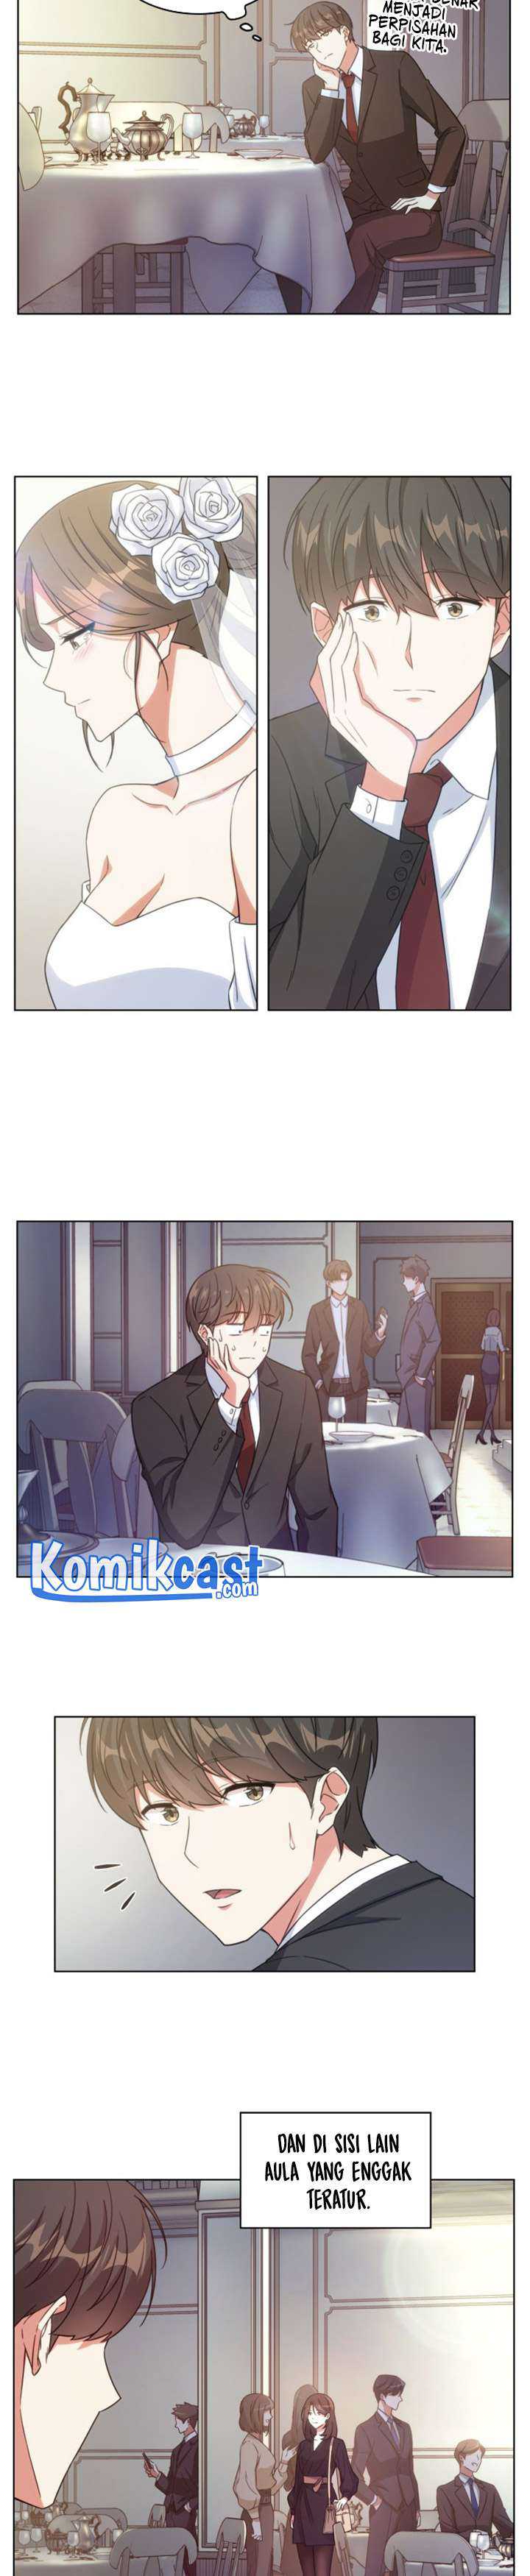 My Office Noona’s Story Chapter 15